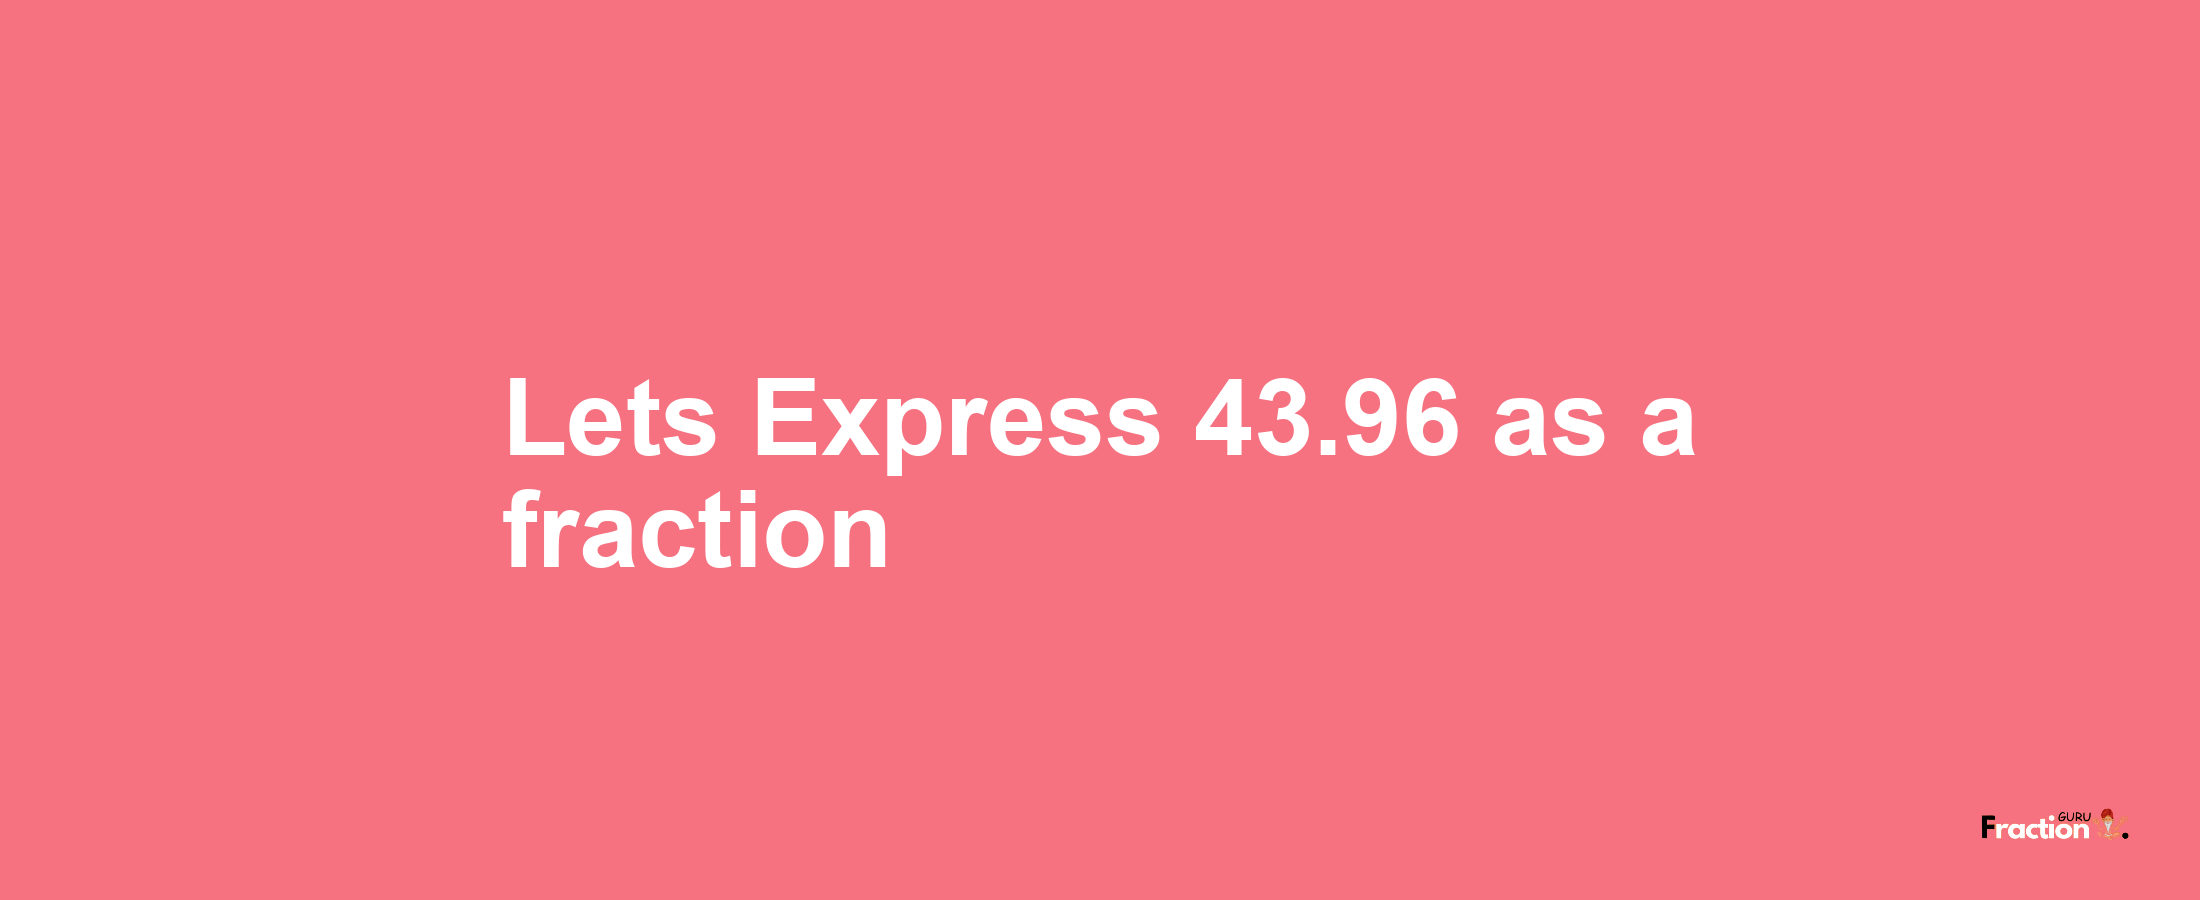 Lets Express 43.96 as afraction